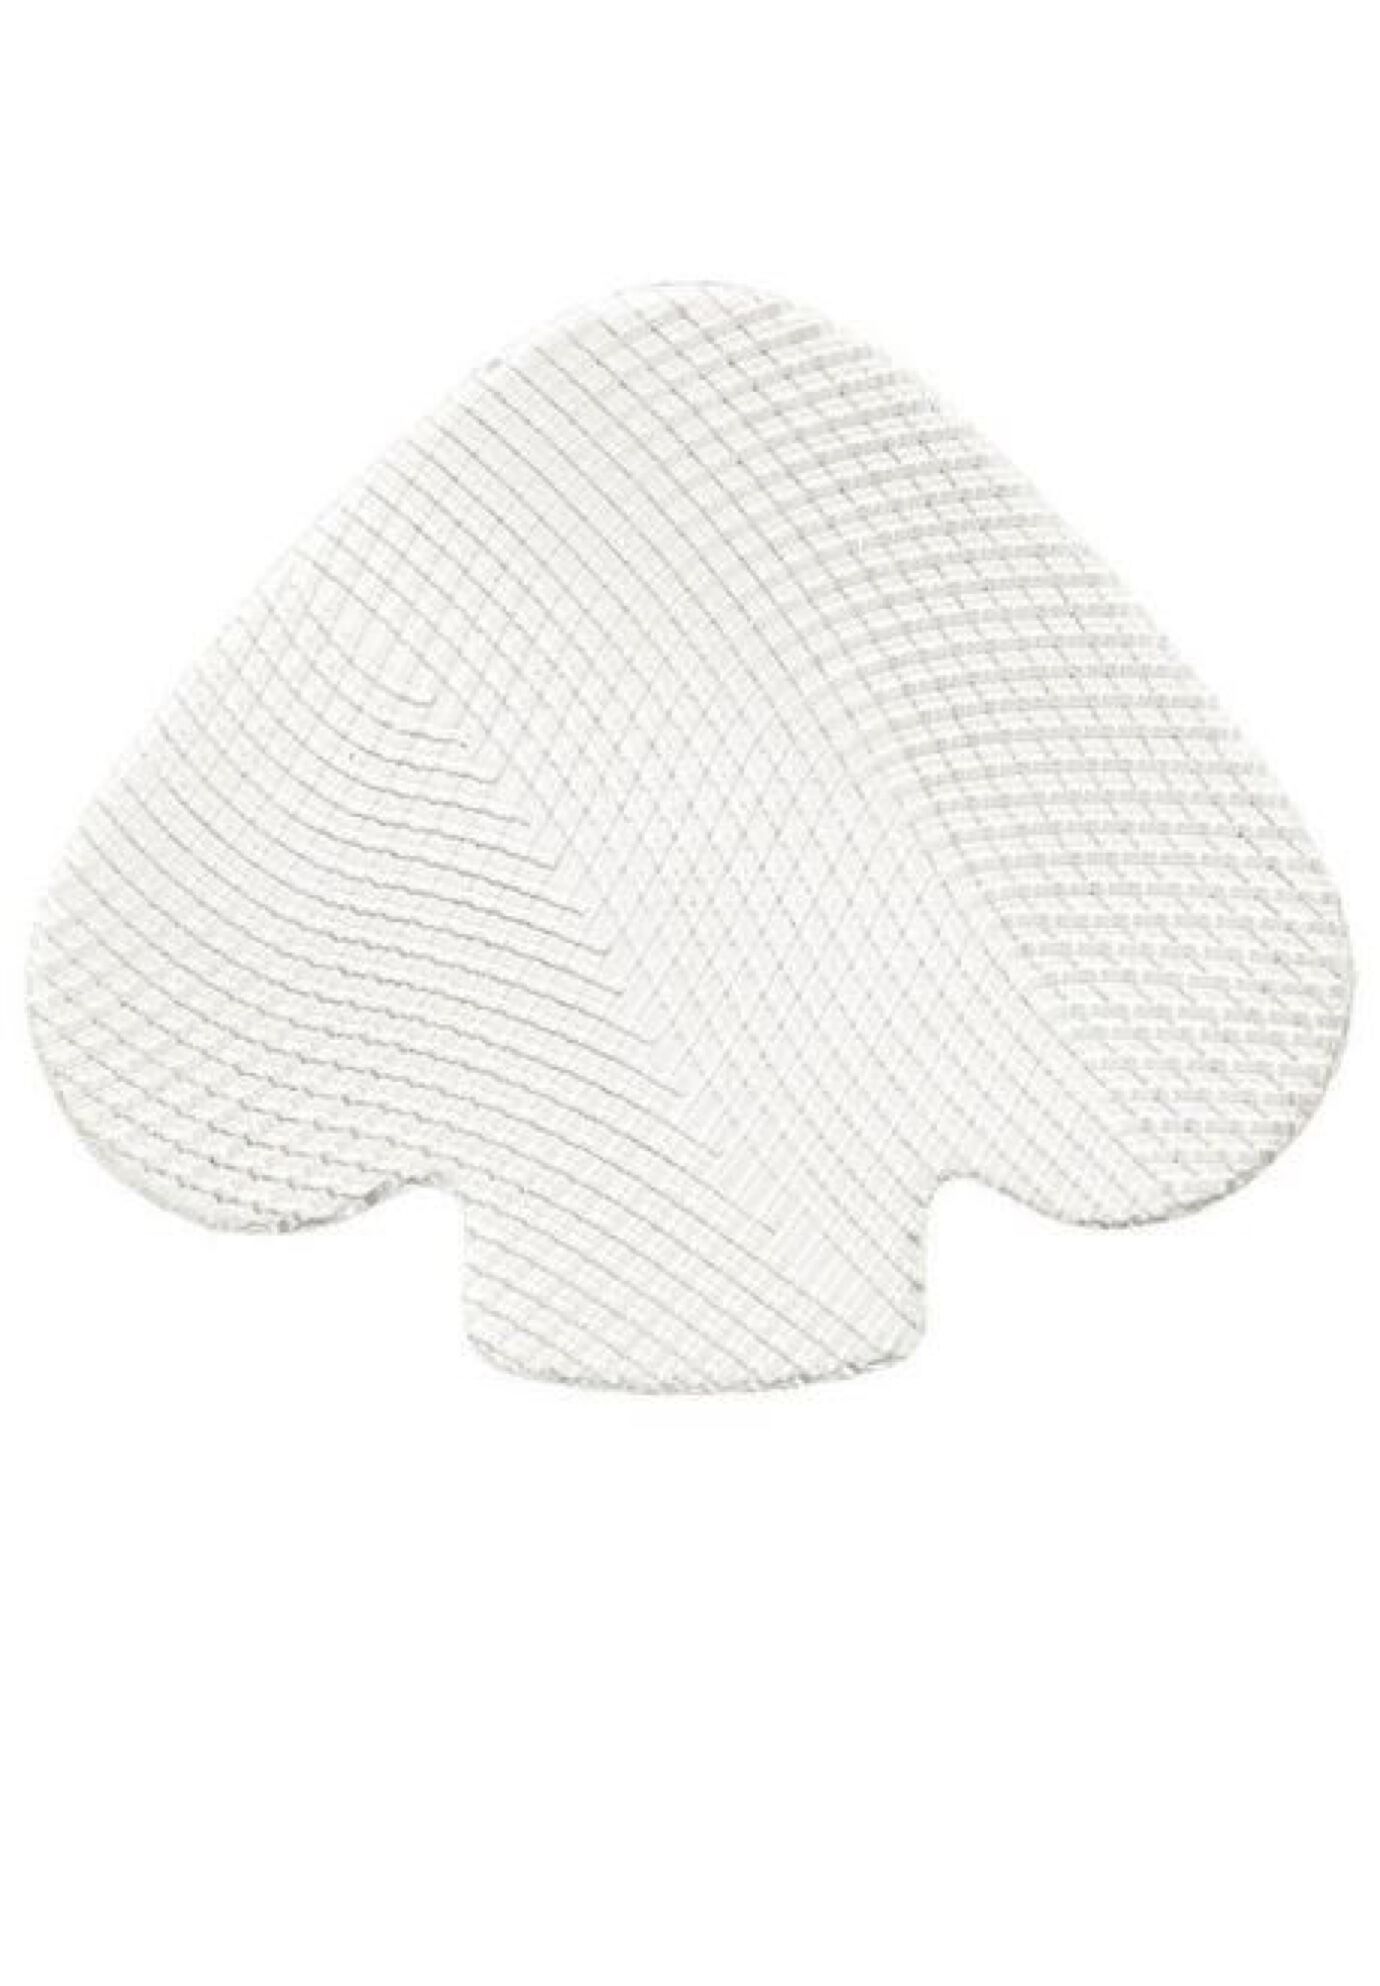 Plus Size Women's Amoena Contact Multi Pad by Amoena in Natural (Size 1)